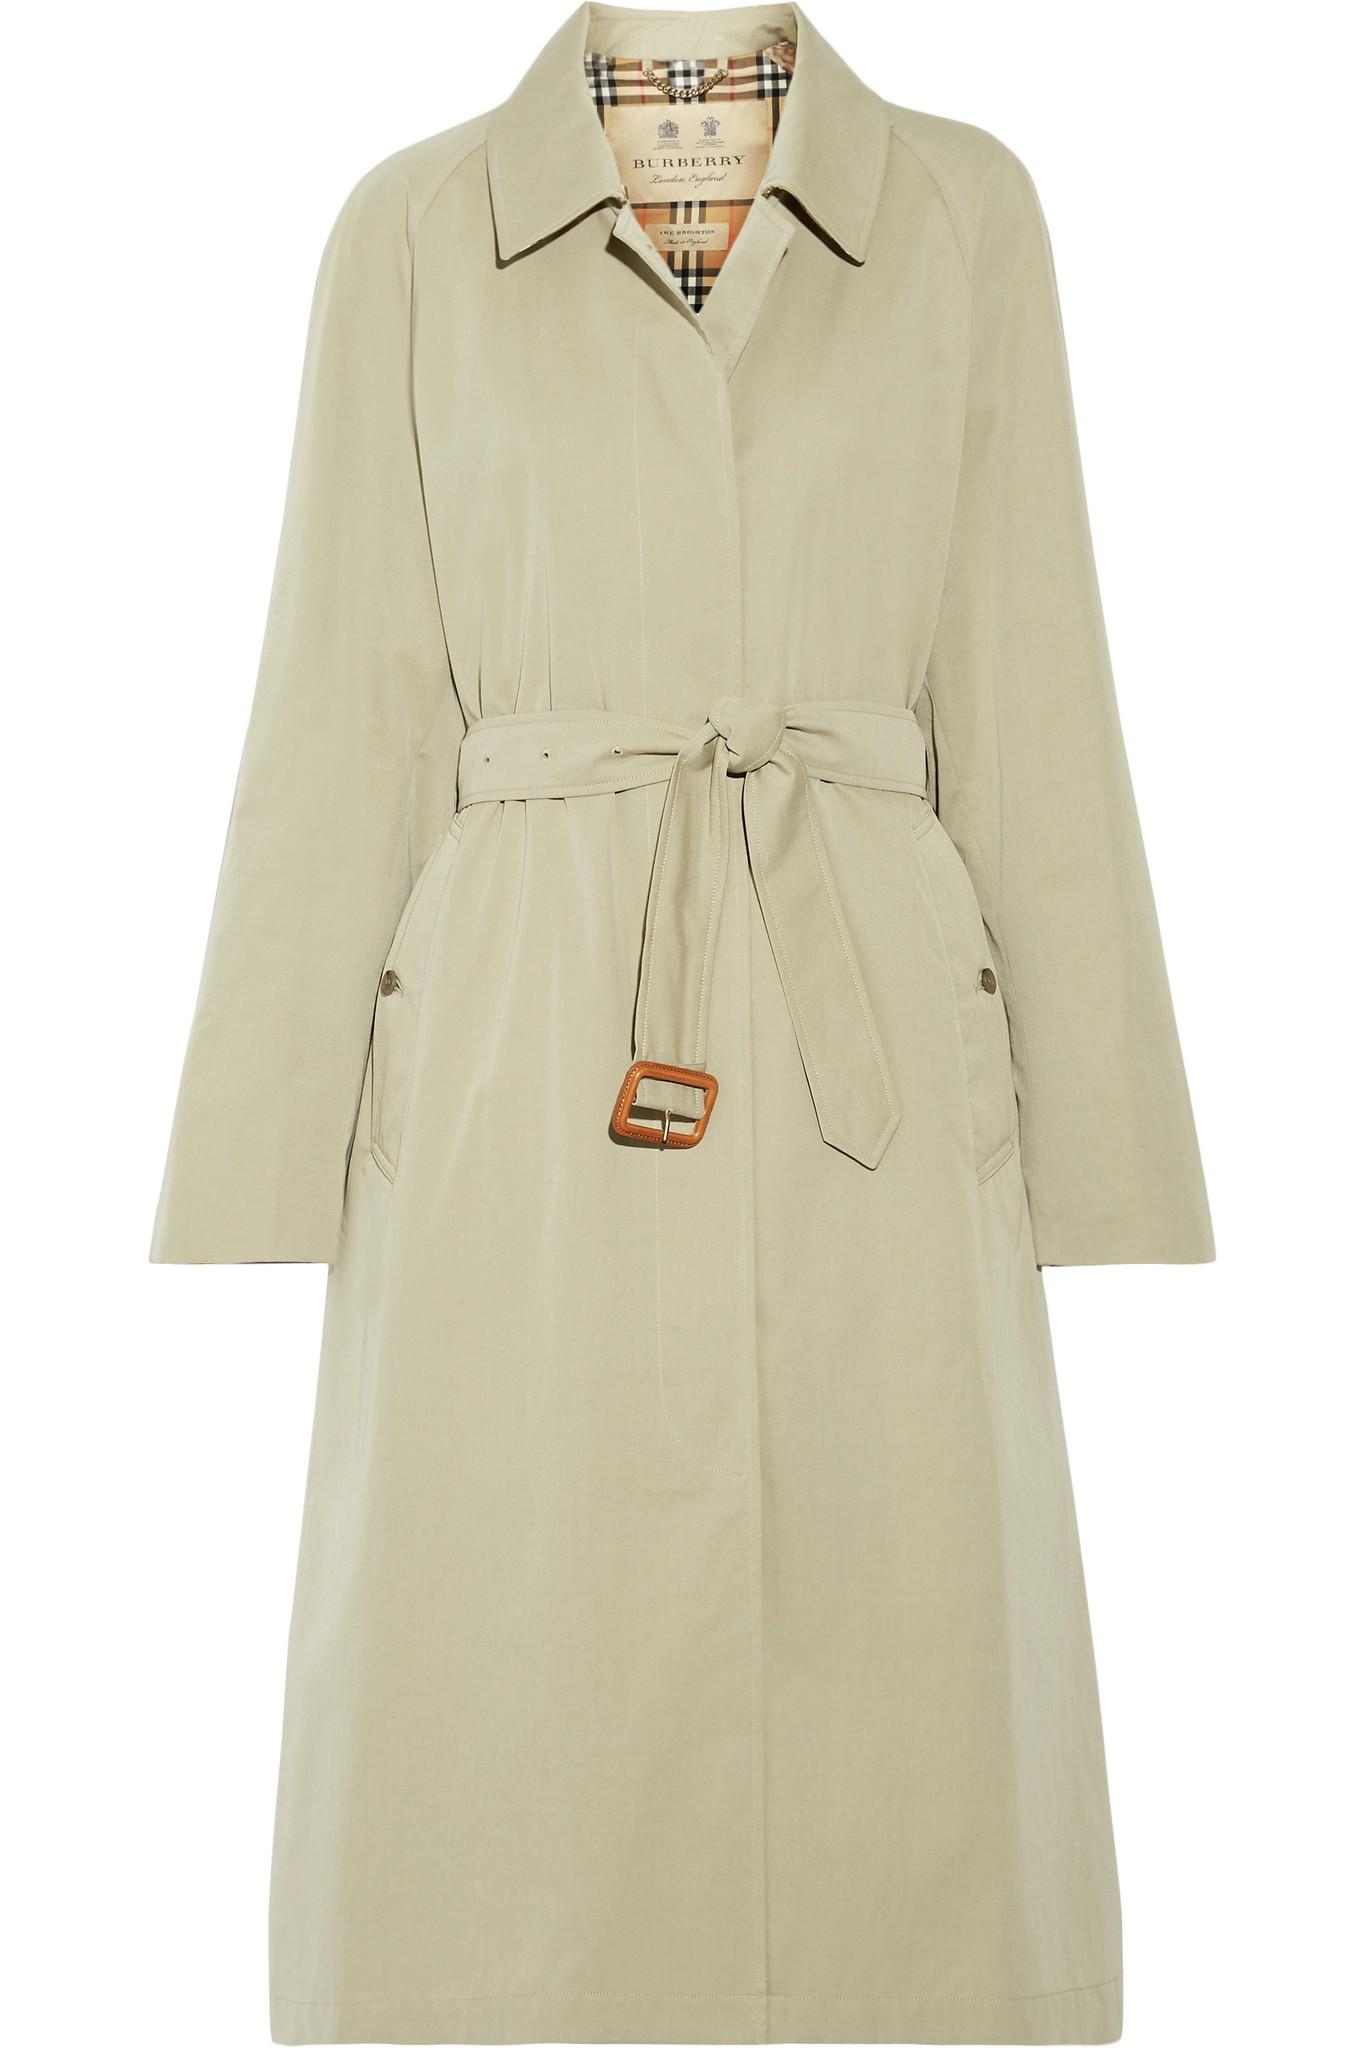 Burberry The Brighton Cotton-gabardine Trench Coat in Natural - Lyst